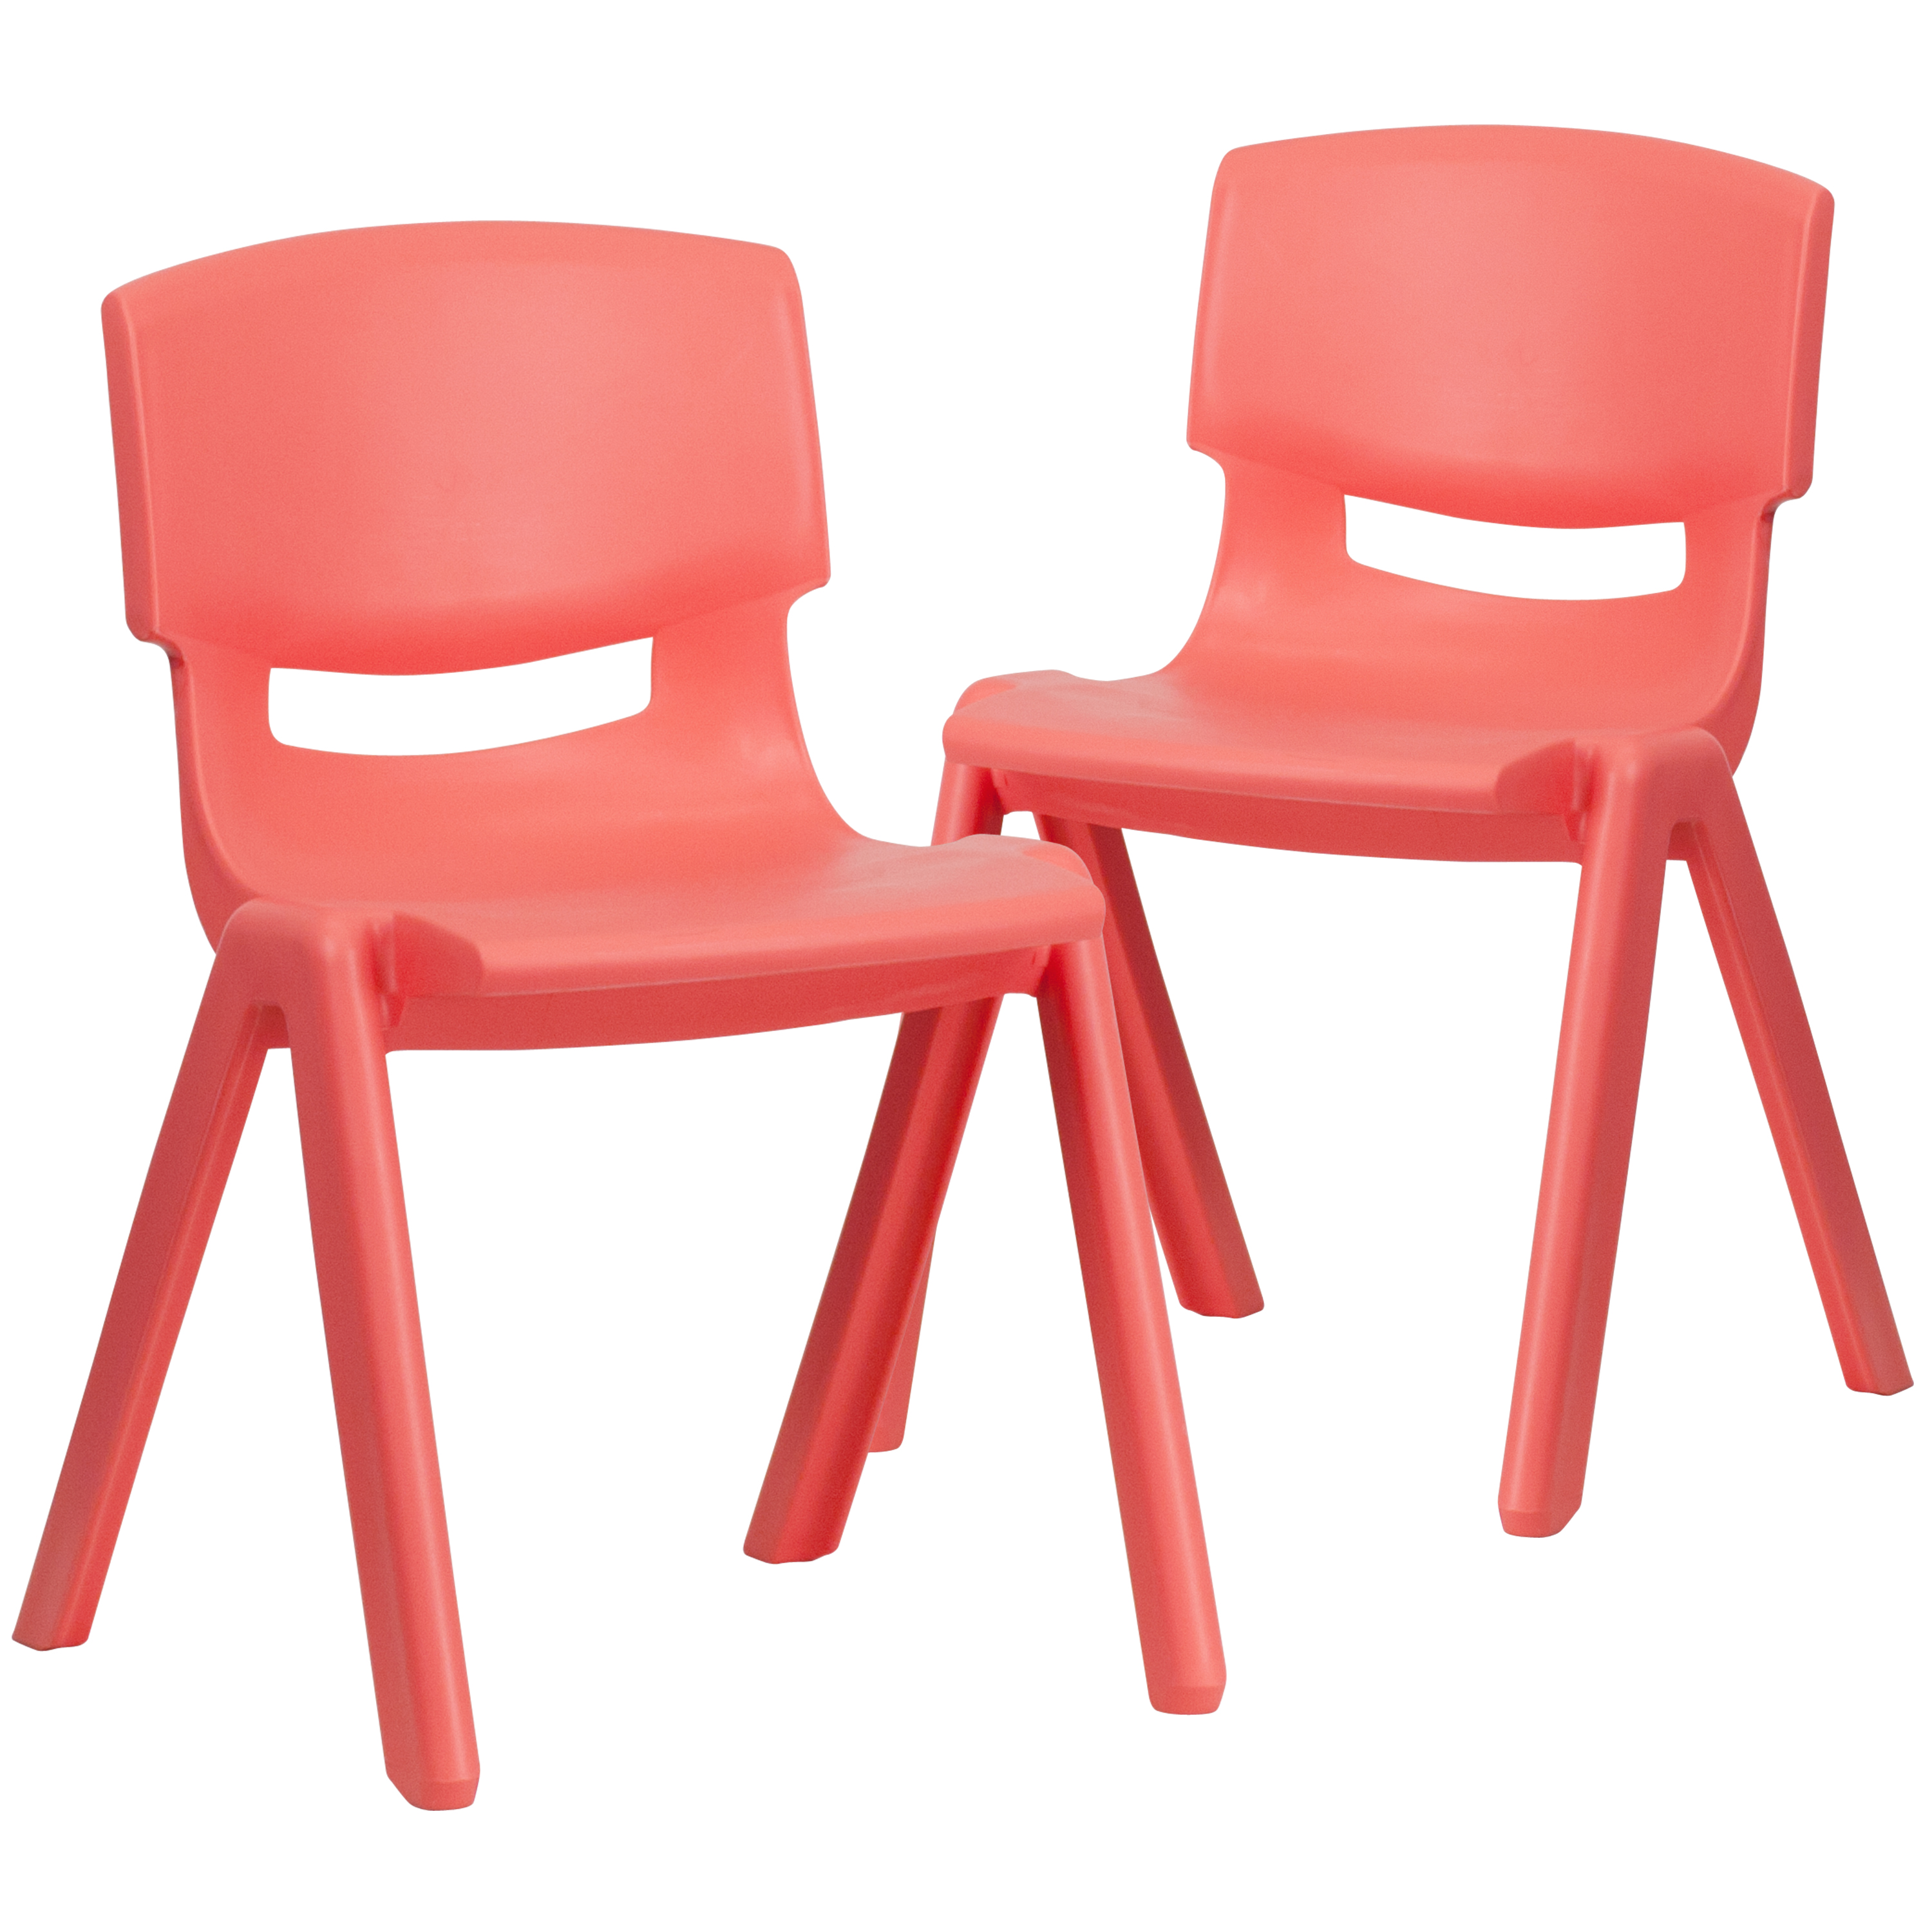 Flash Furniture 2-YU-YCX-004-RED-GG Red Plastic Stackable School Chair with 13.25" Seat Height, 2 Pack